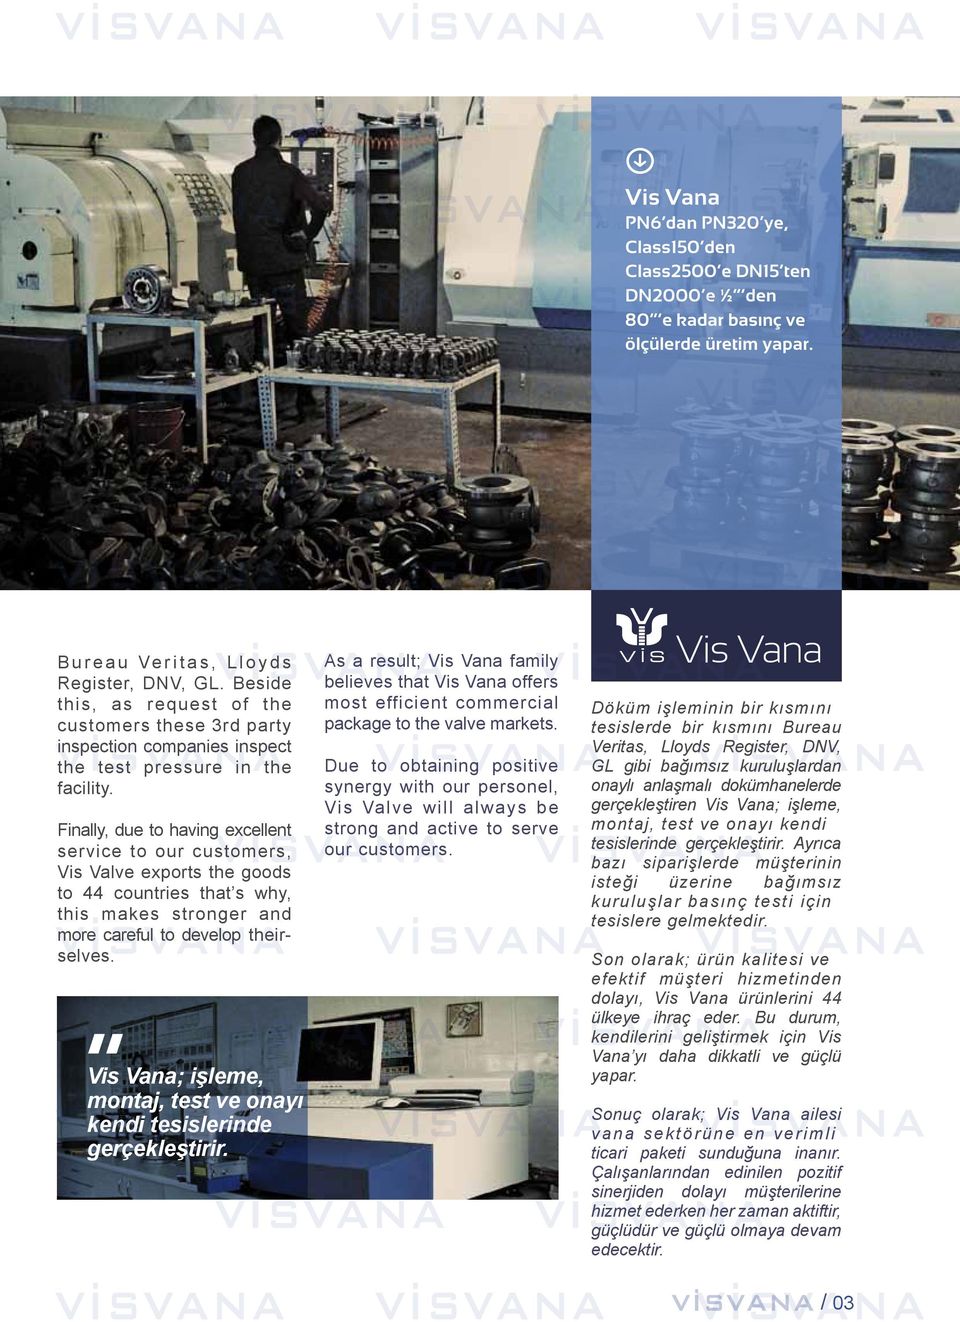 Finally, due to having excellent service to our customers, Vis Valve exports the goods to countries that s why, this makes stronger and more careful to develop theirselves.